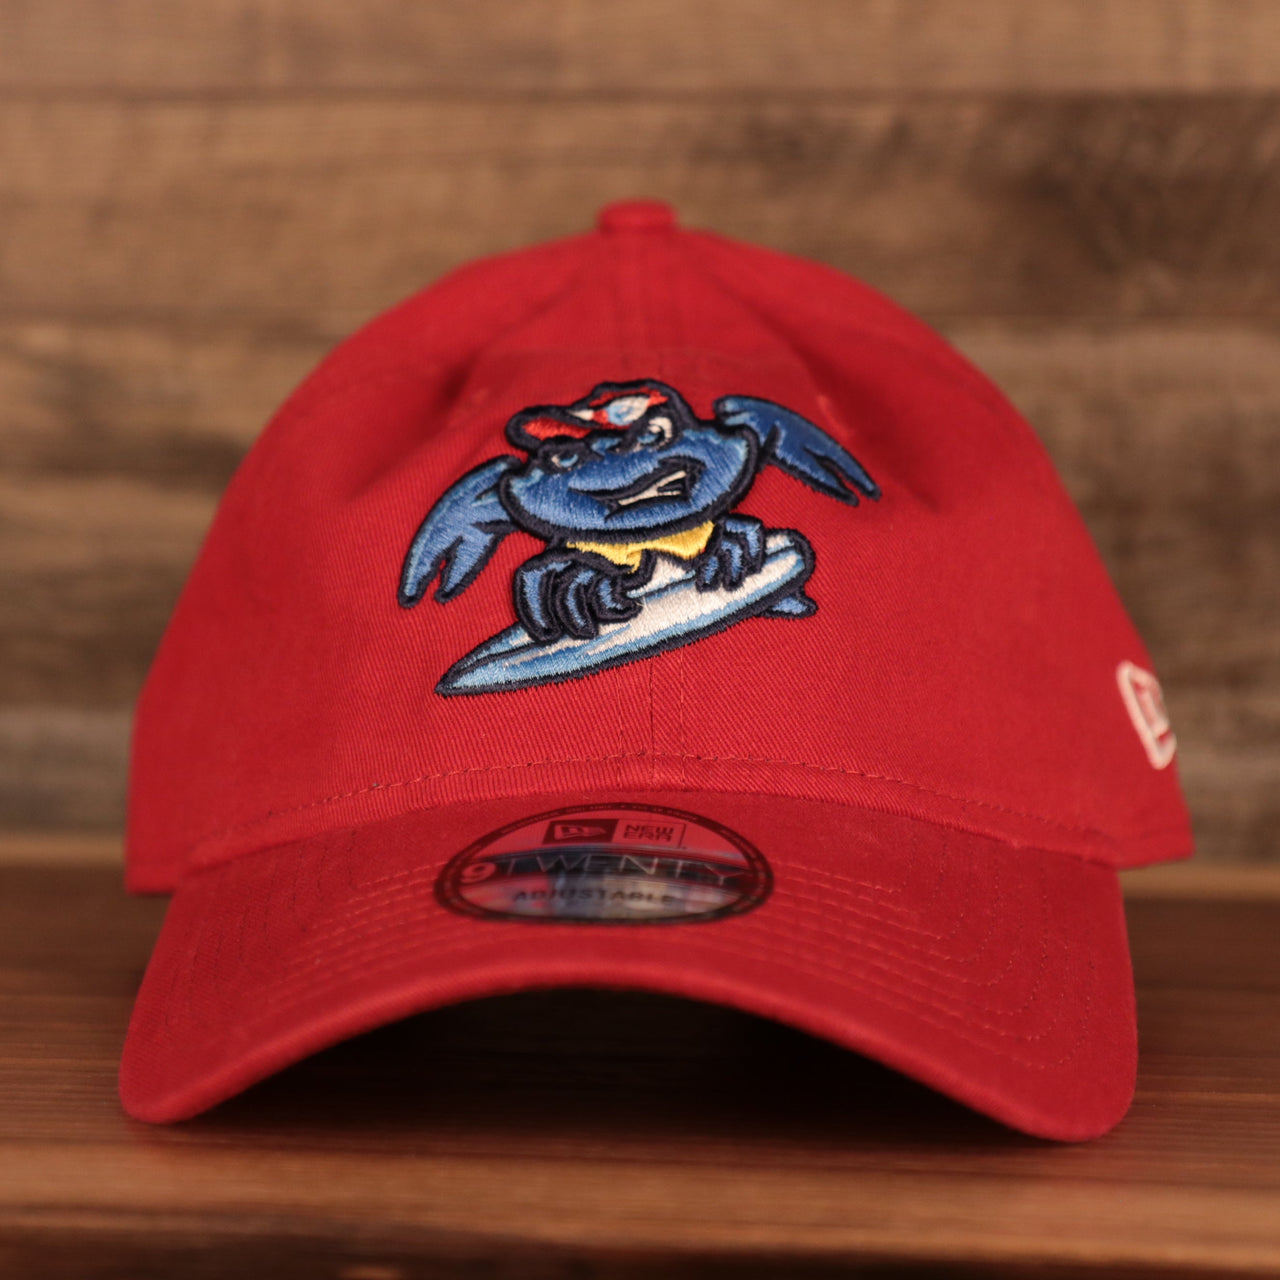 Embroidered on the front of the Jersey Shore BlueClaws baseball cap is the blue crab mascot for the BlueClaws. The logo is embroidered in light blue, yellow, white, and red, and features a blue crab riding a surf board.